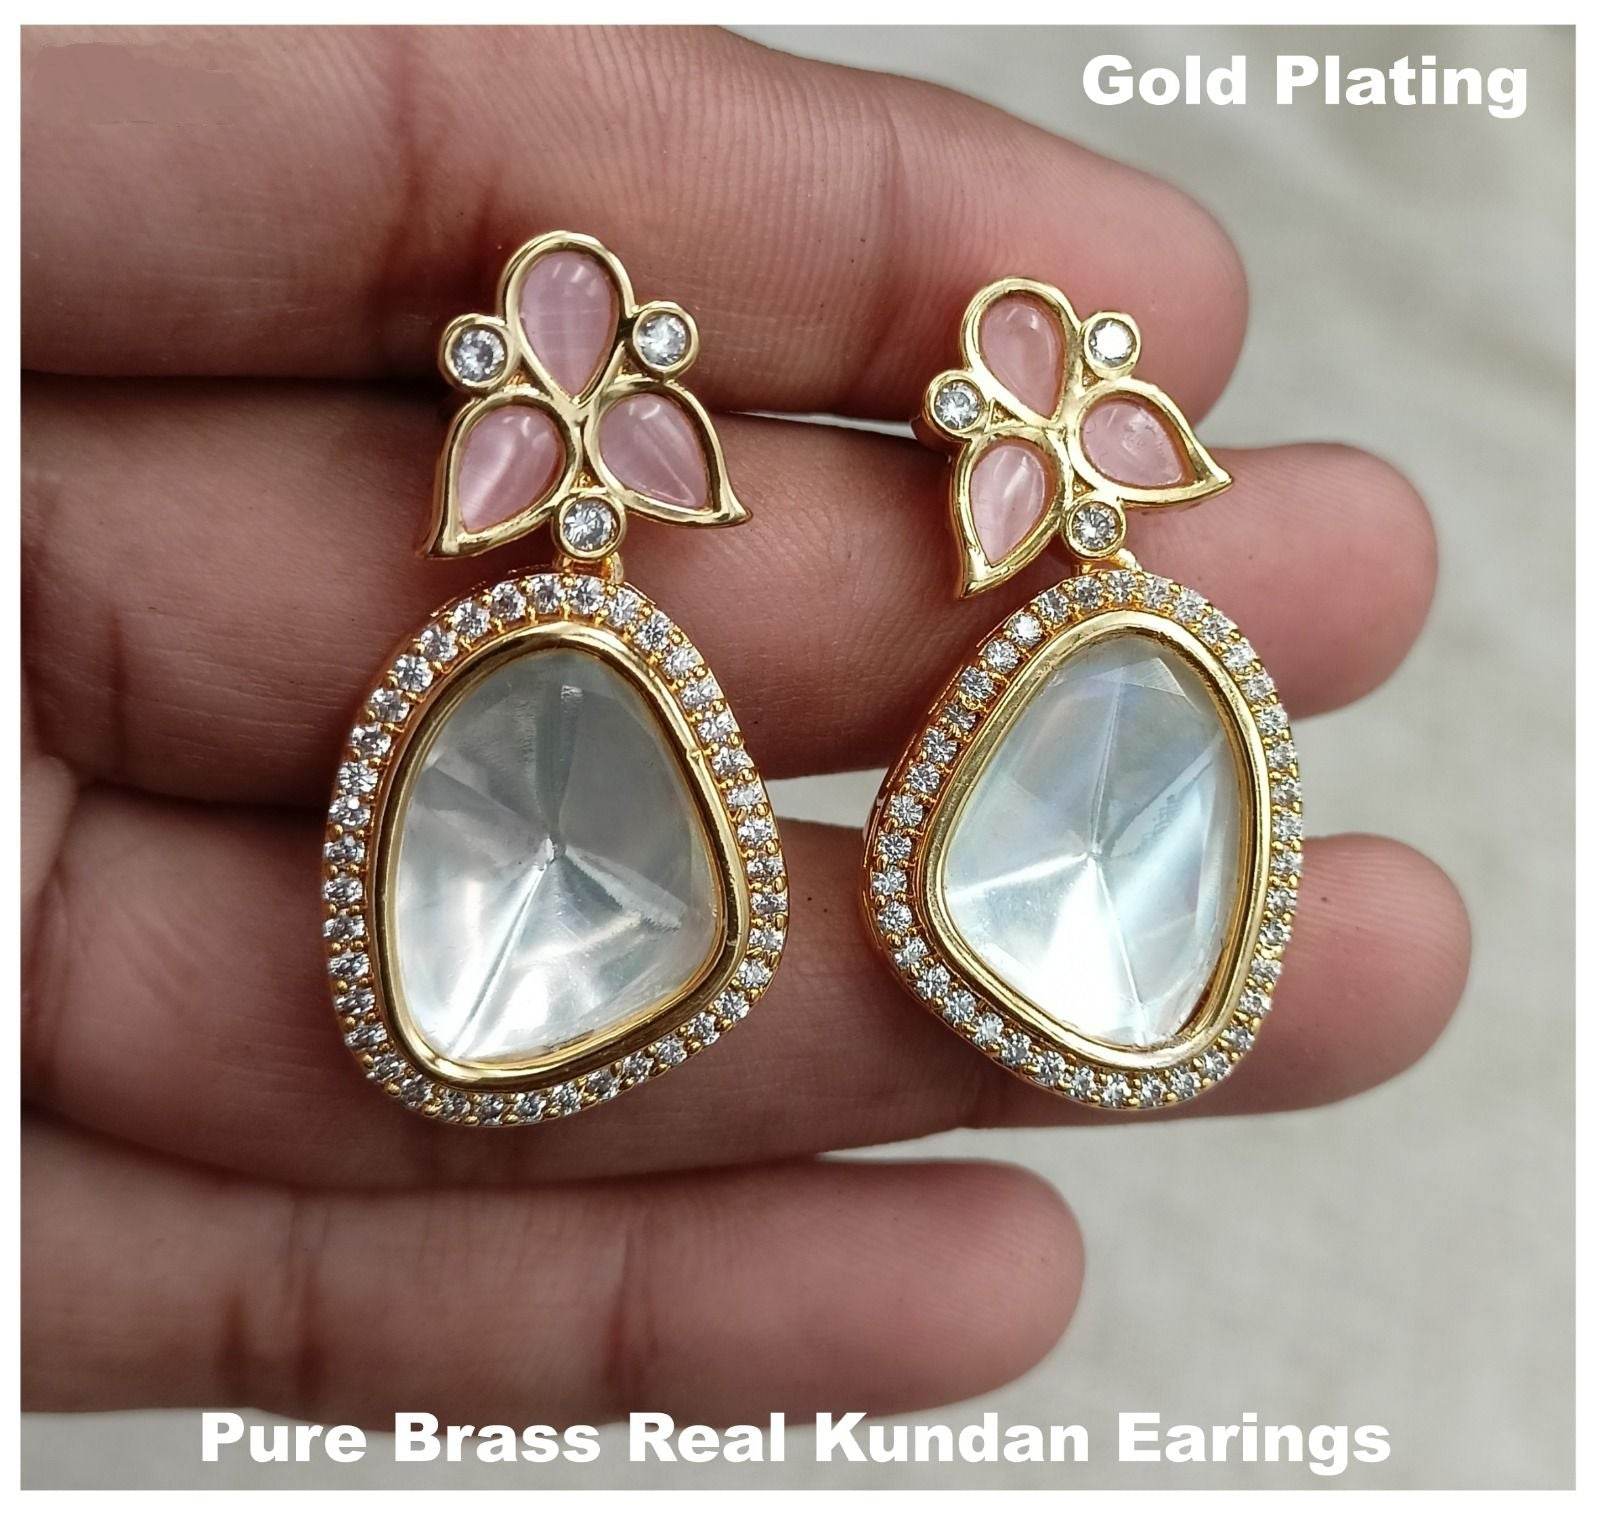 gold plating pure brass earrings in rose color